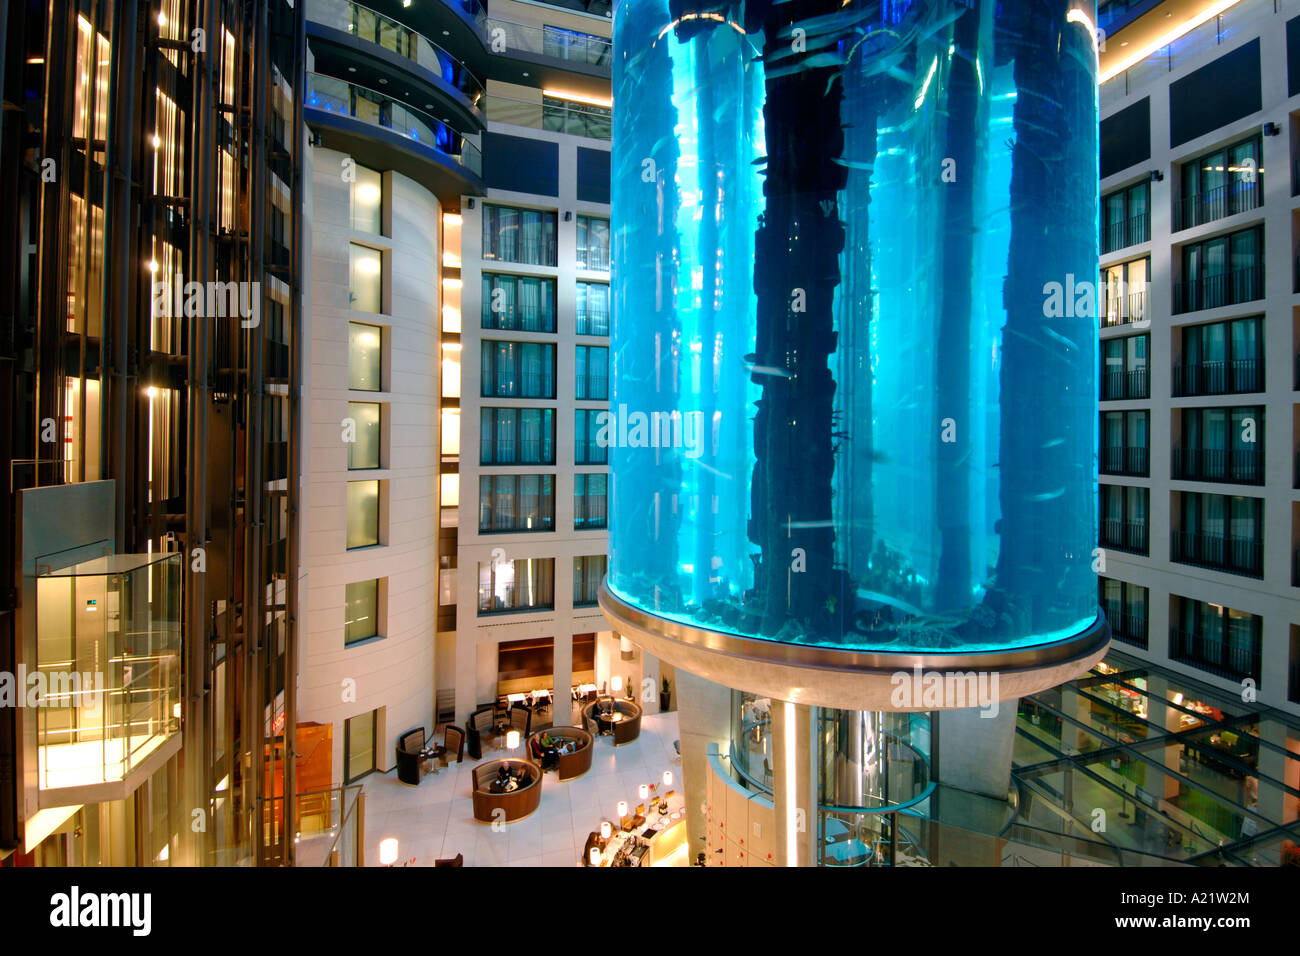 The atrium and aquarium of the Radisson hotlel on Karl Liebknecht Strasse in East Berlin. Stock Photo